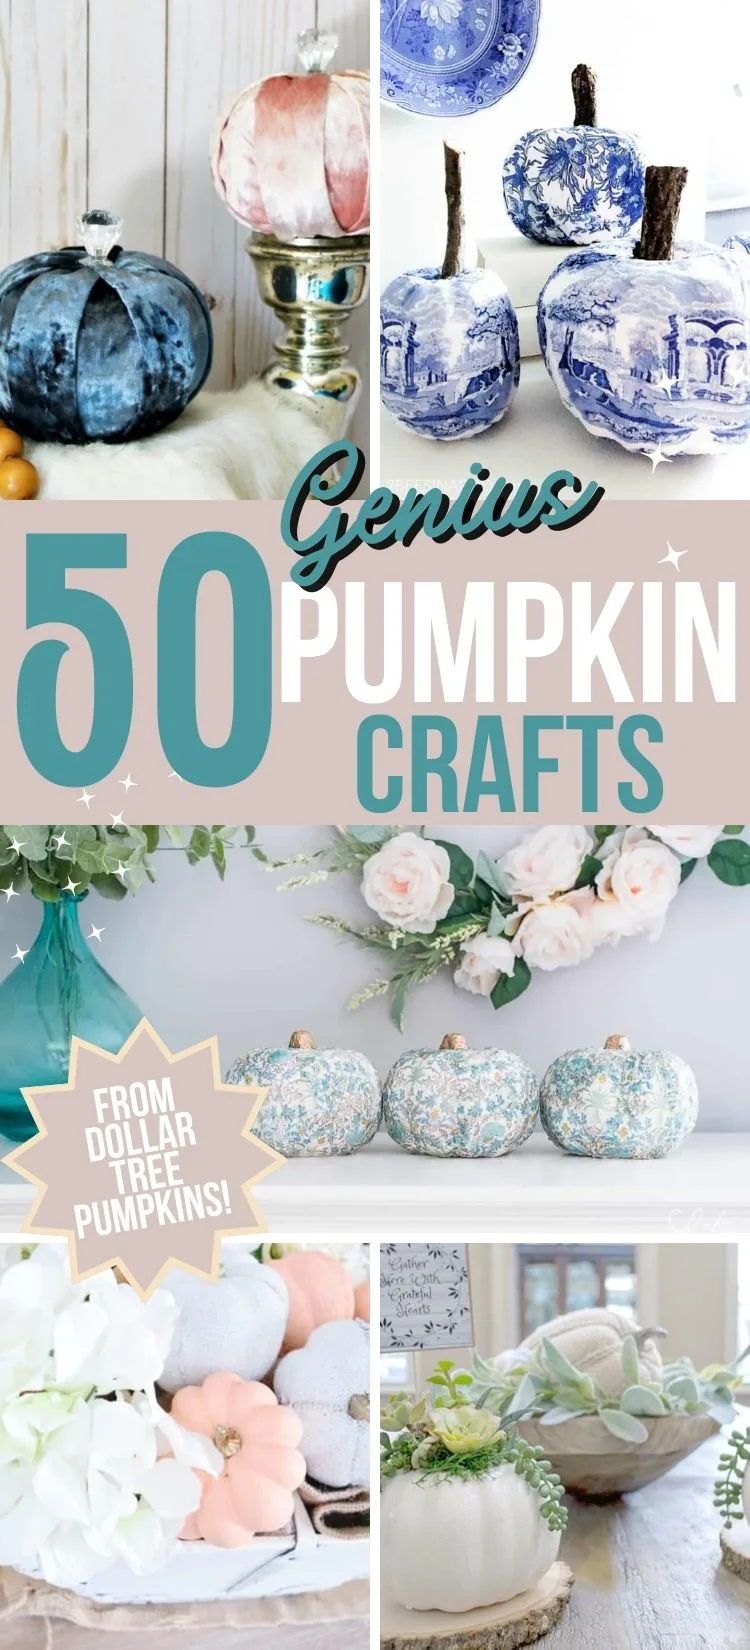 50 Best Dollar Tree Pumpkins (Fall Craft Ideas 2022) pin collage with text overlay